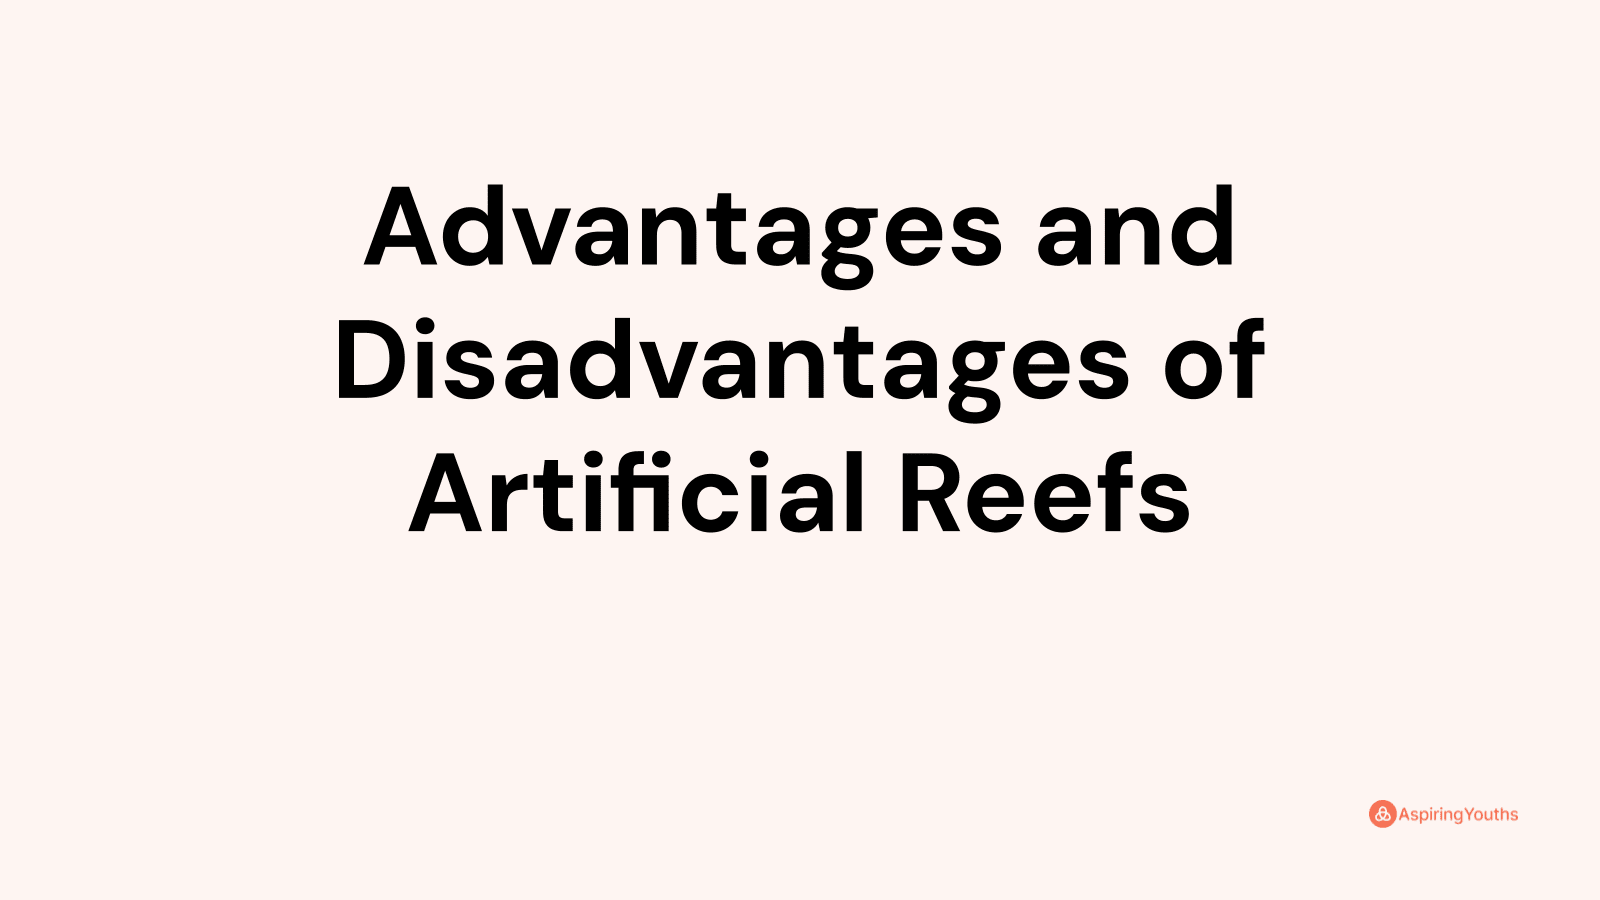 Advantages and disadvantages of Artificial Reefs